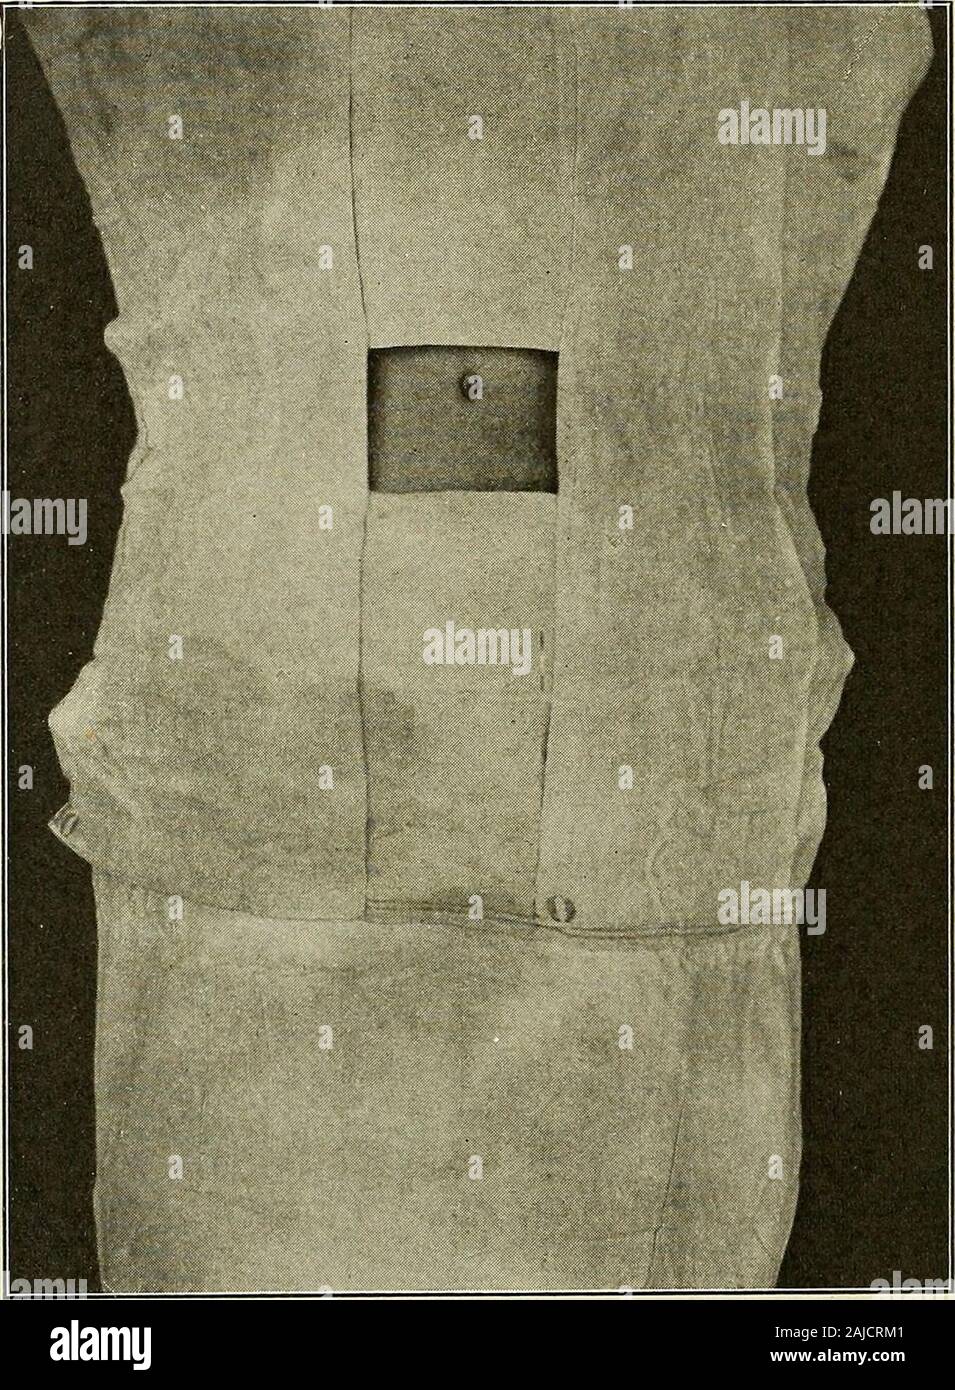 Preparatory and after treatment in operative cases . Fig. 122.—Sterile Towels Arranged inManner to Surround Operative Field. THE OPERATING ROOM IN PRIVATE PRACTICE Using the description of the operating room as described as astandard, as nearly as possible an arrangement should be attemptedwhen operating in private practice. As already stated, sterile 170 THE OPERATING ROOM material for wipes, dressings, sterile towels and dressings areobtainable in the market, packed in impervious packages, whichsimplifies very much the problem. If the surgeon have not at hiscommand apparatus which will steri Stock Photo